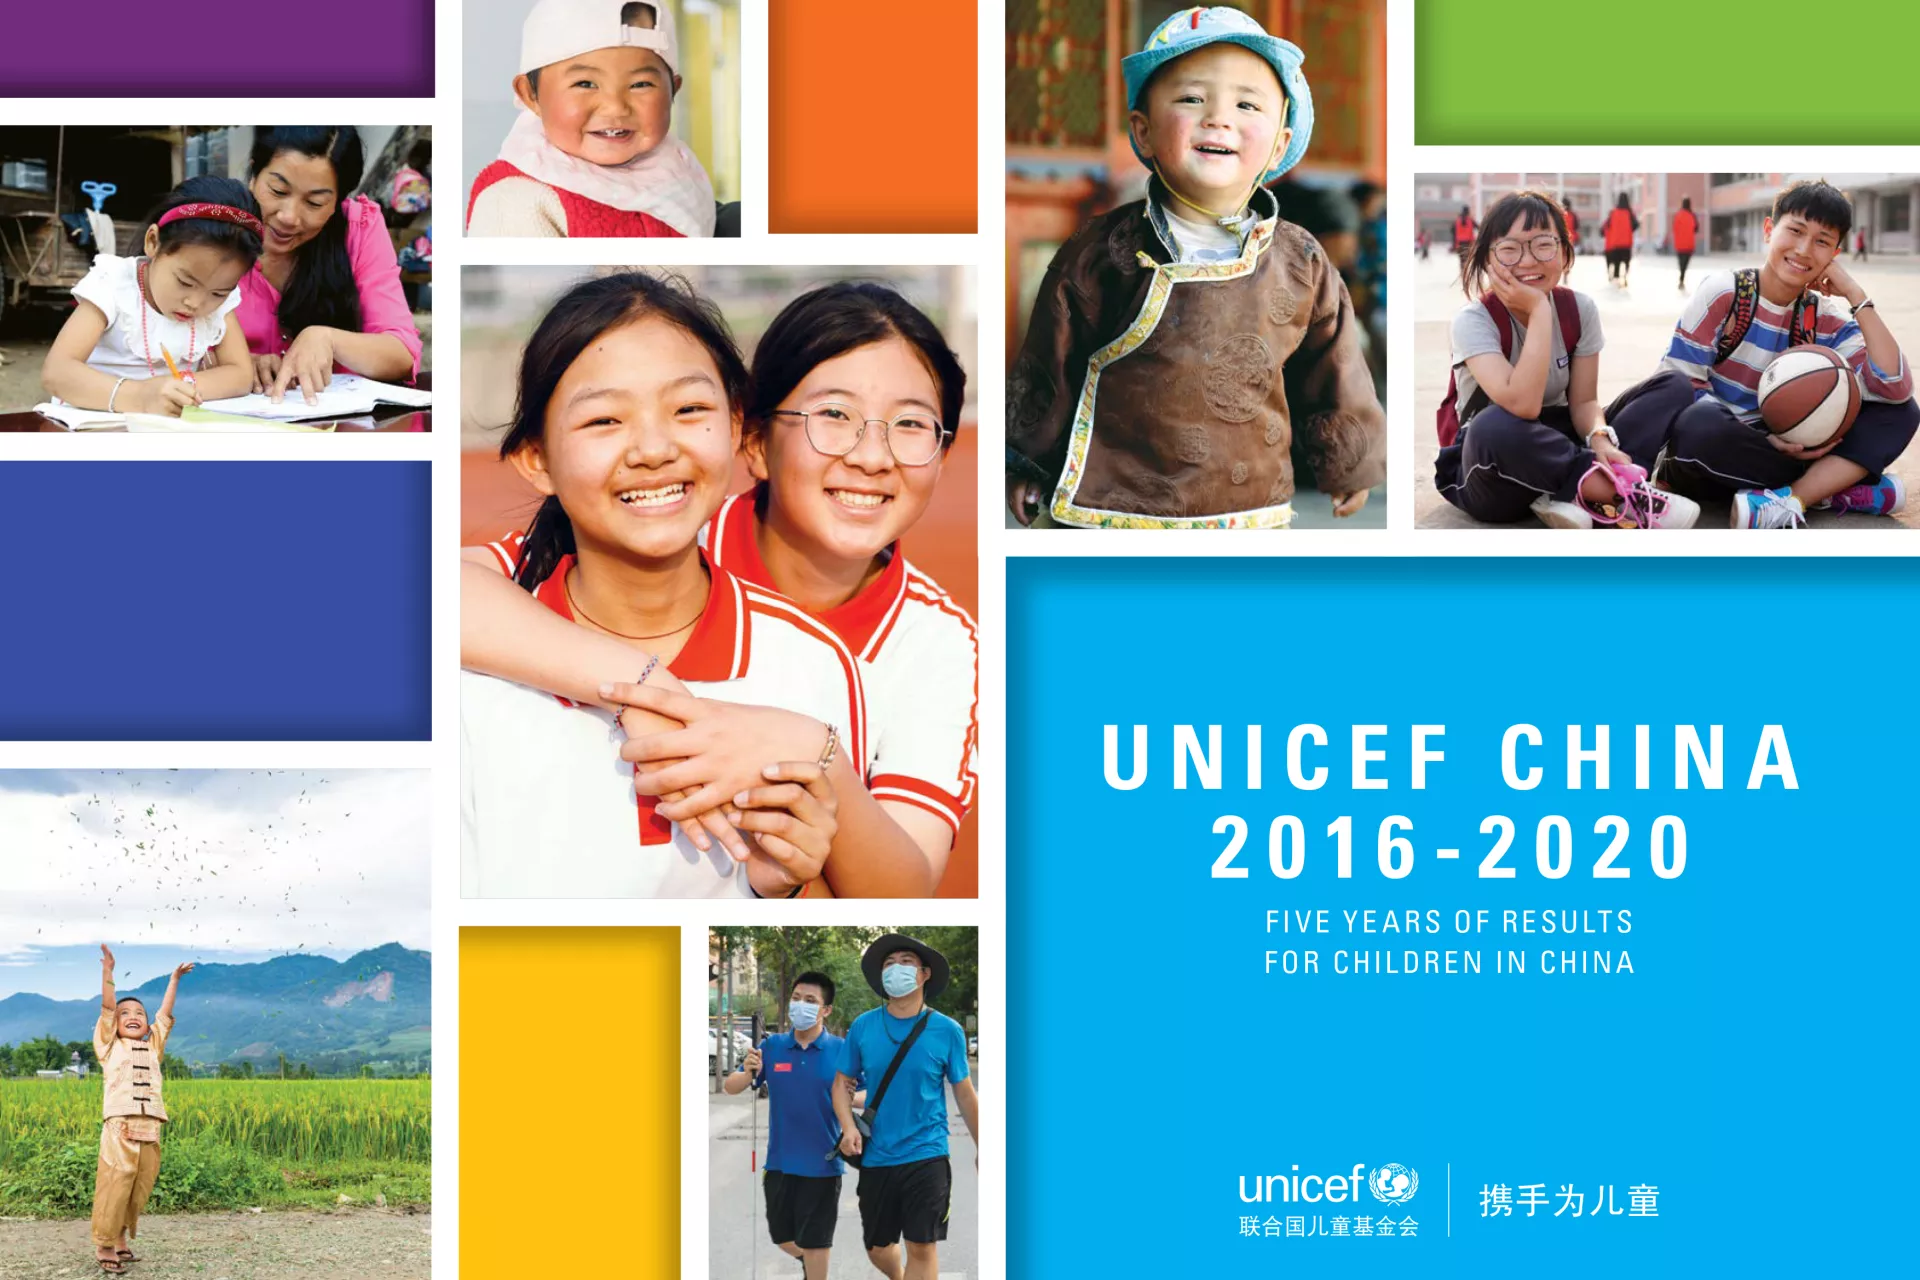 FIVE YEARS OF RESULTS FOR CHILDREN IN CHINA